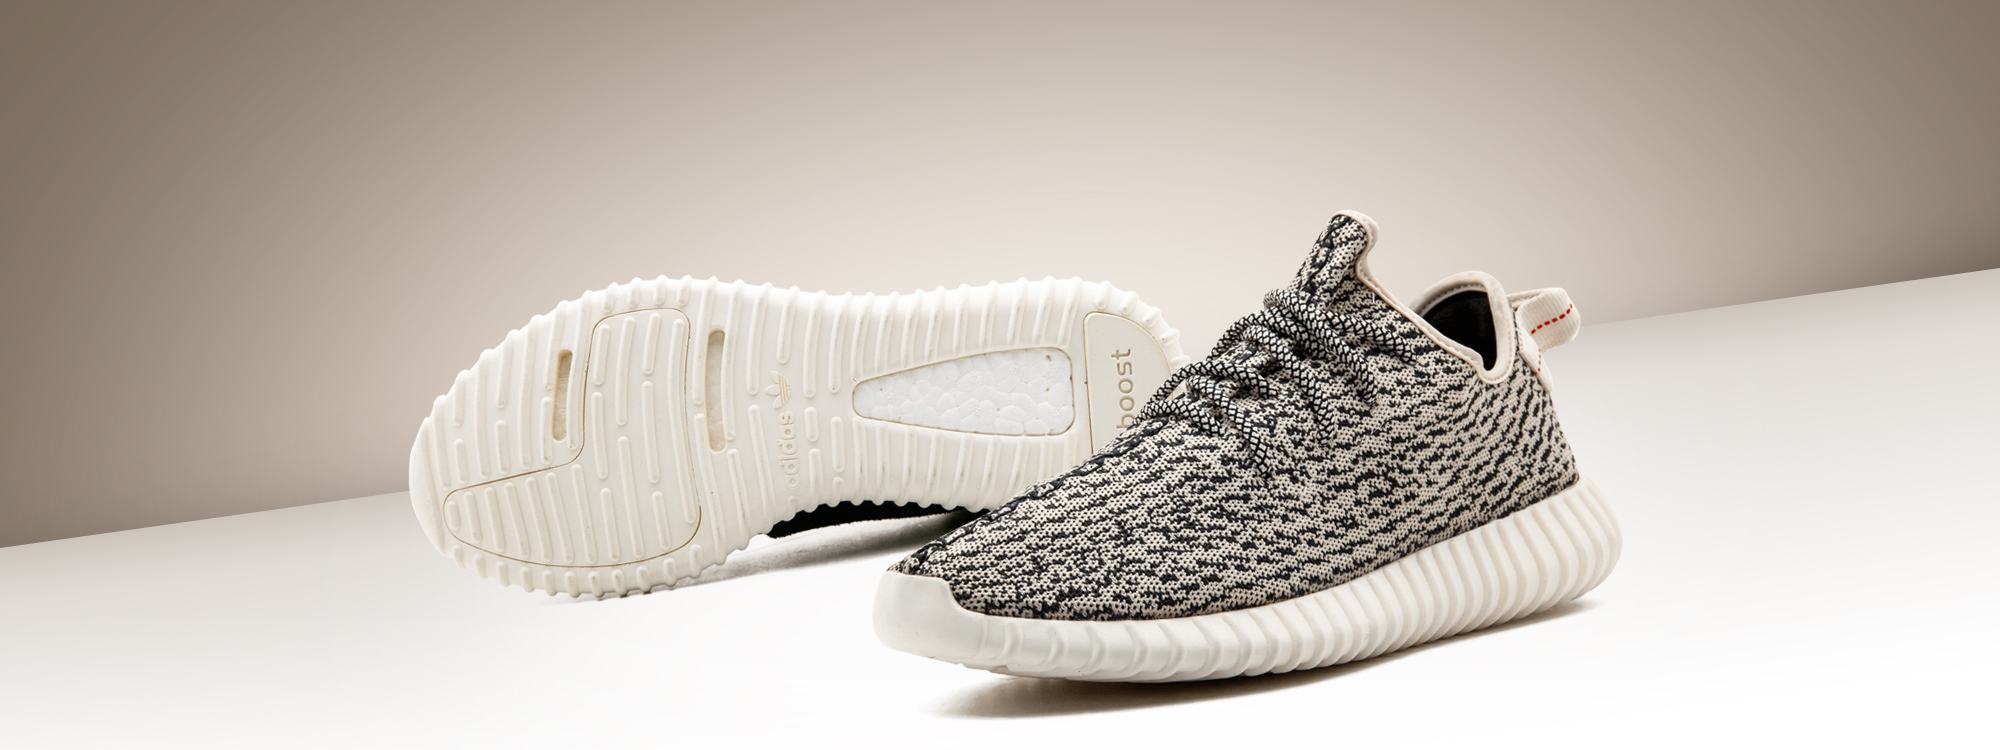  Yeezy Boost  350 Turtle Dove shoes price